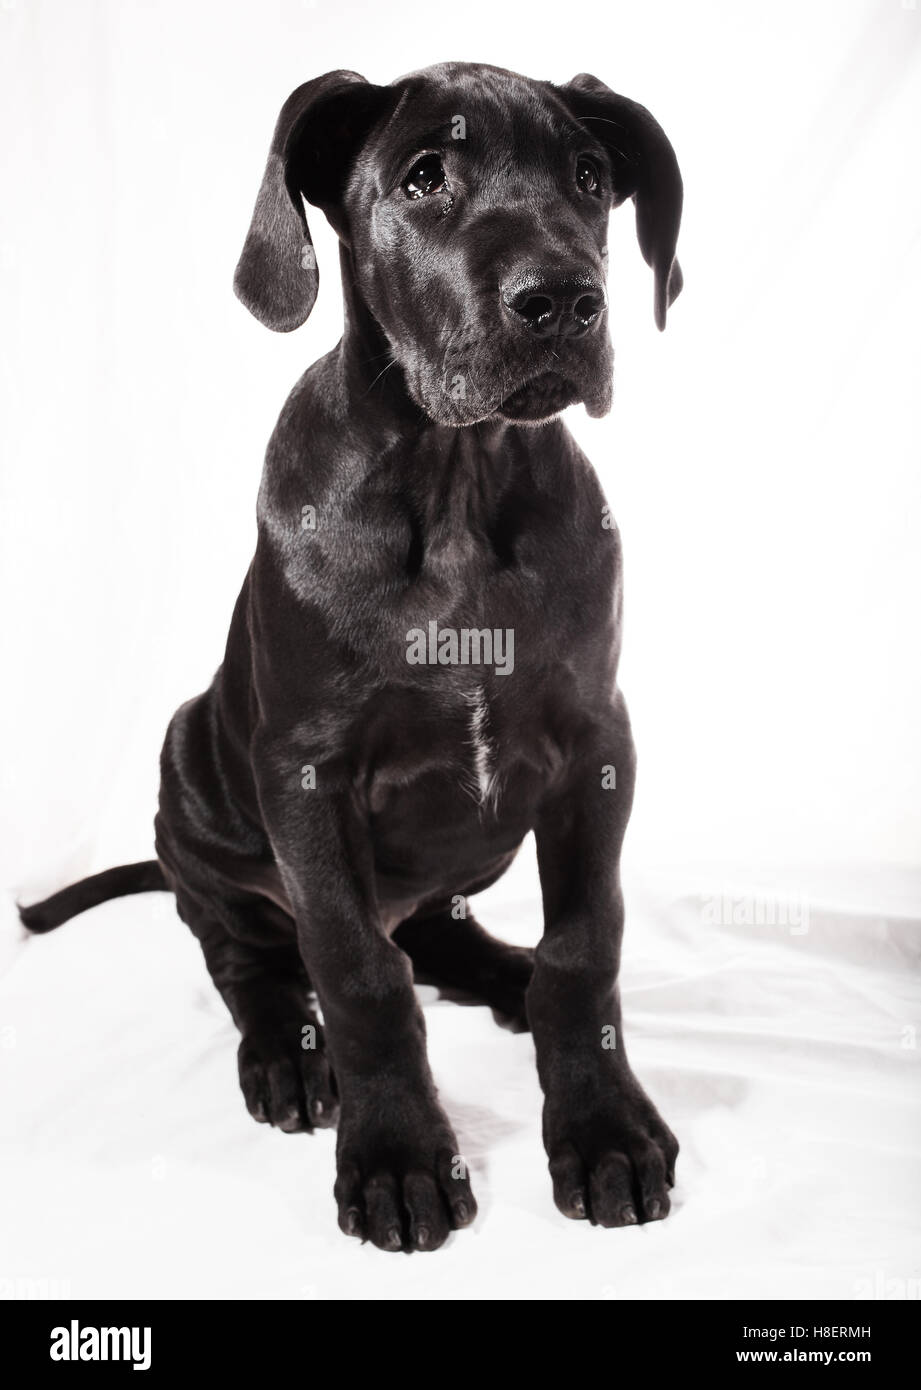 gray and black great dane